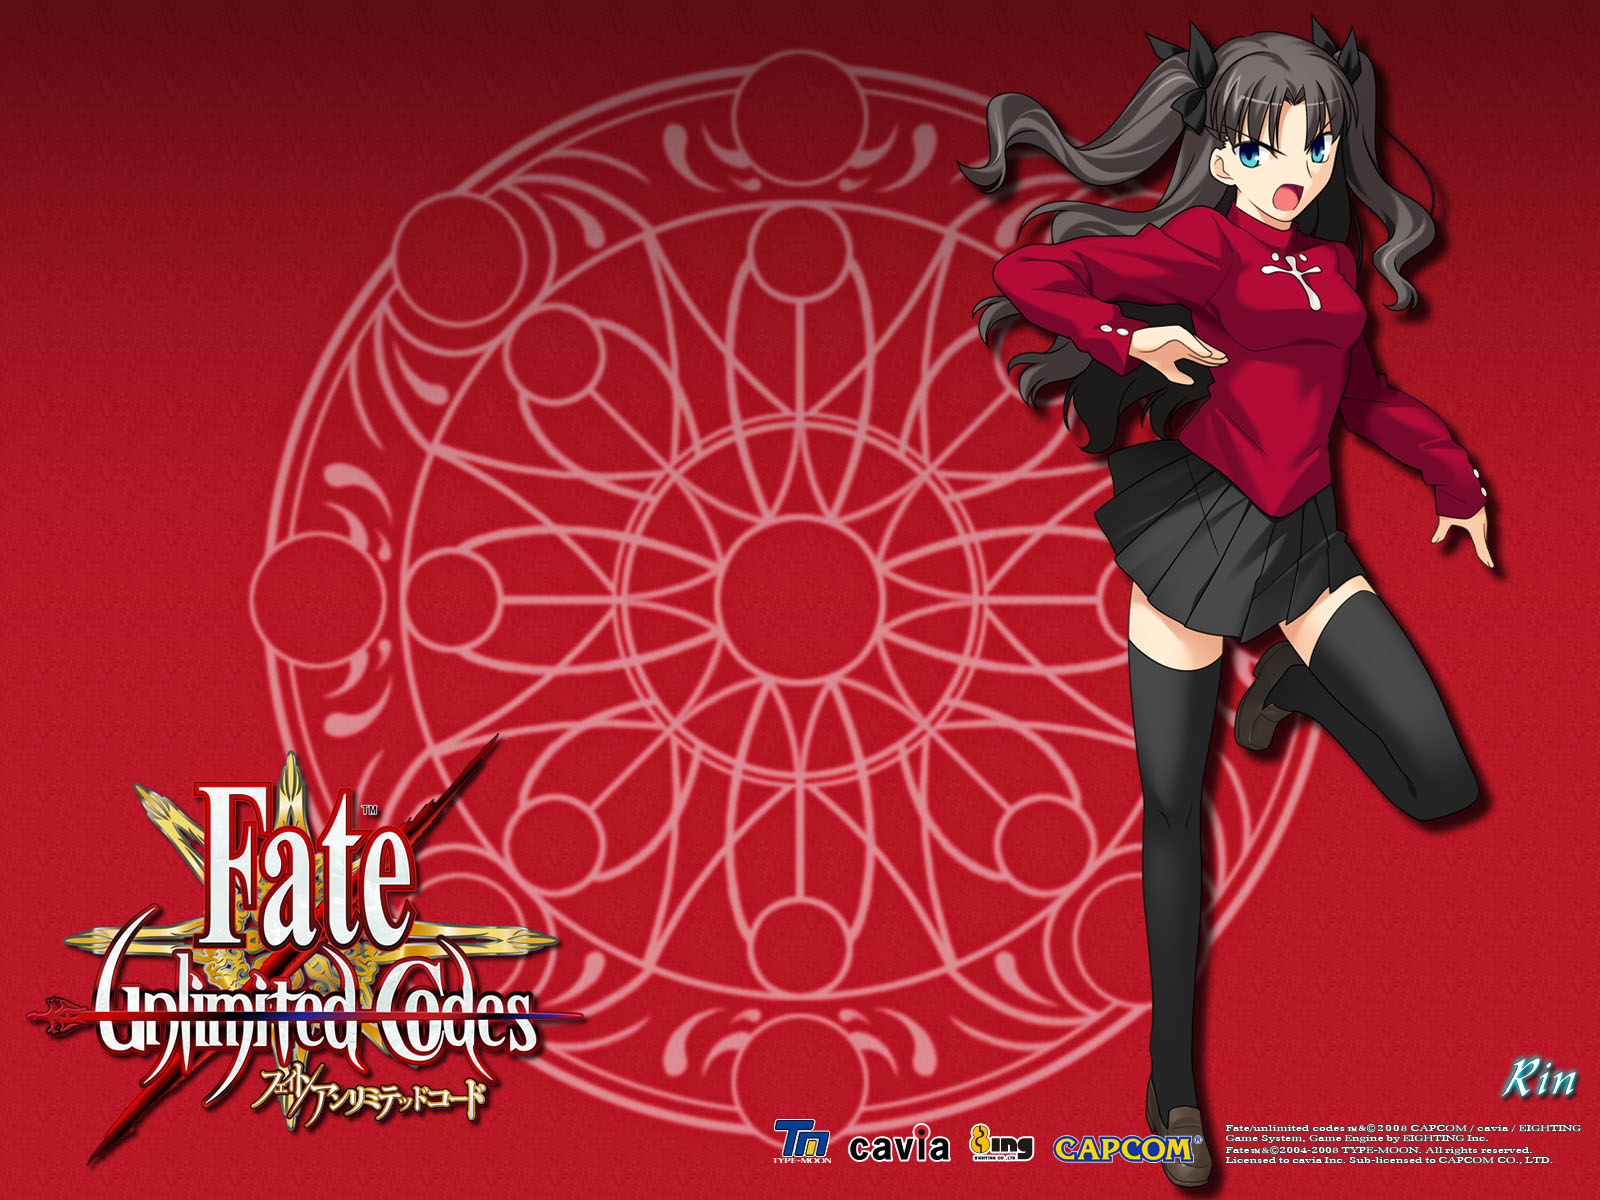 Rin Tohsaka, a character from Fate/unlimited codes, in an anime-style desktop wallpaper.